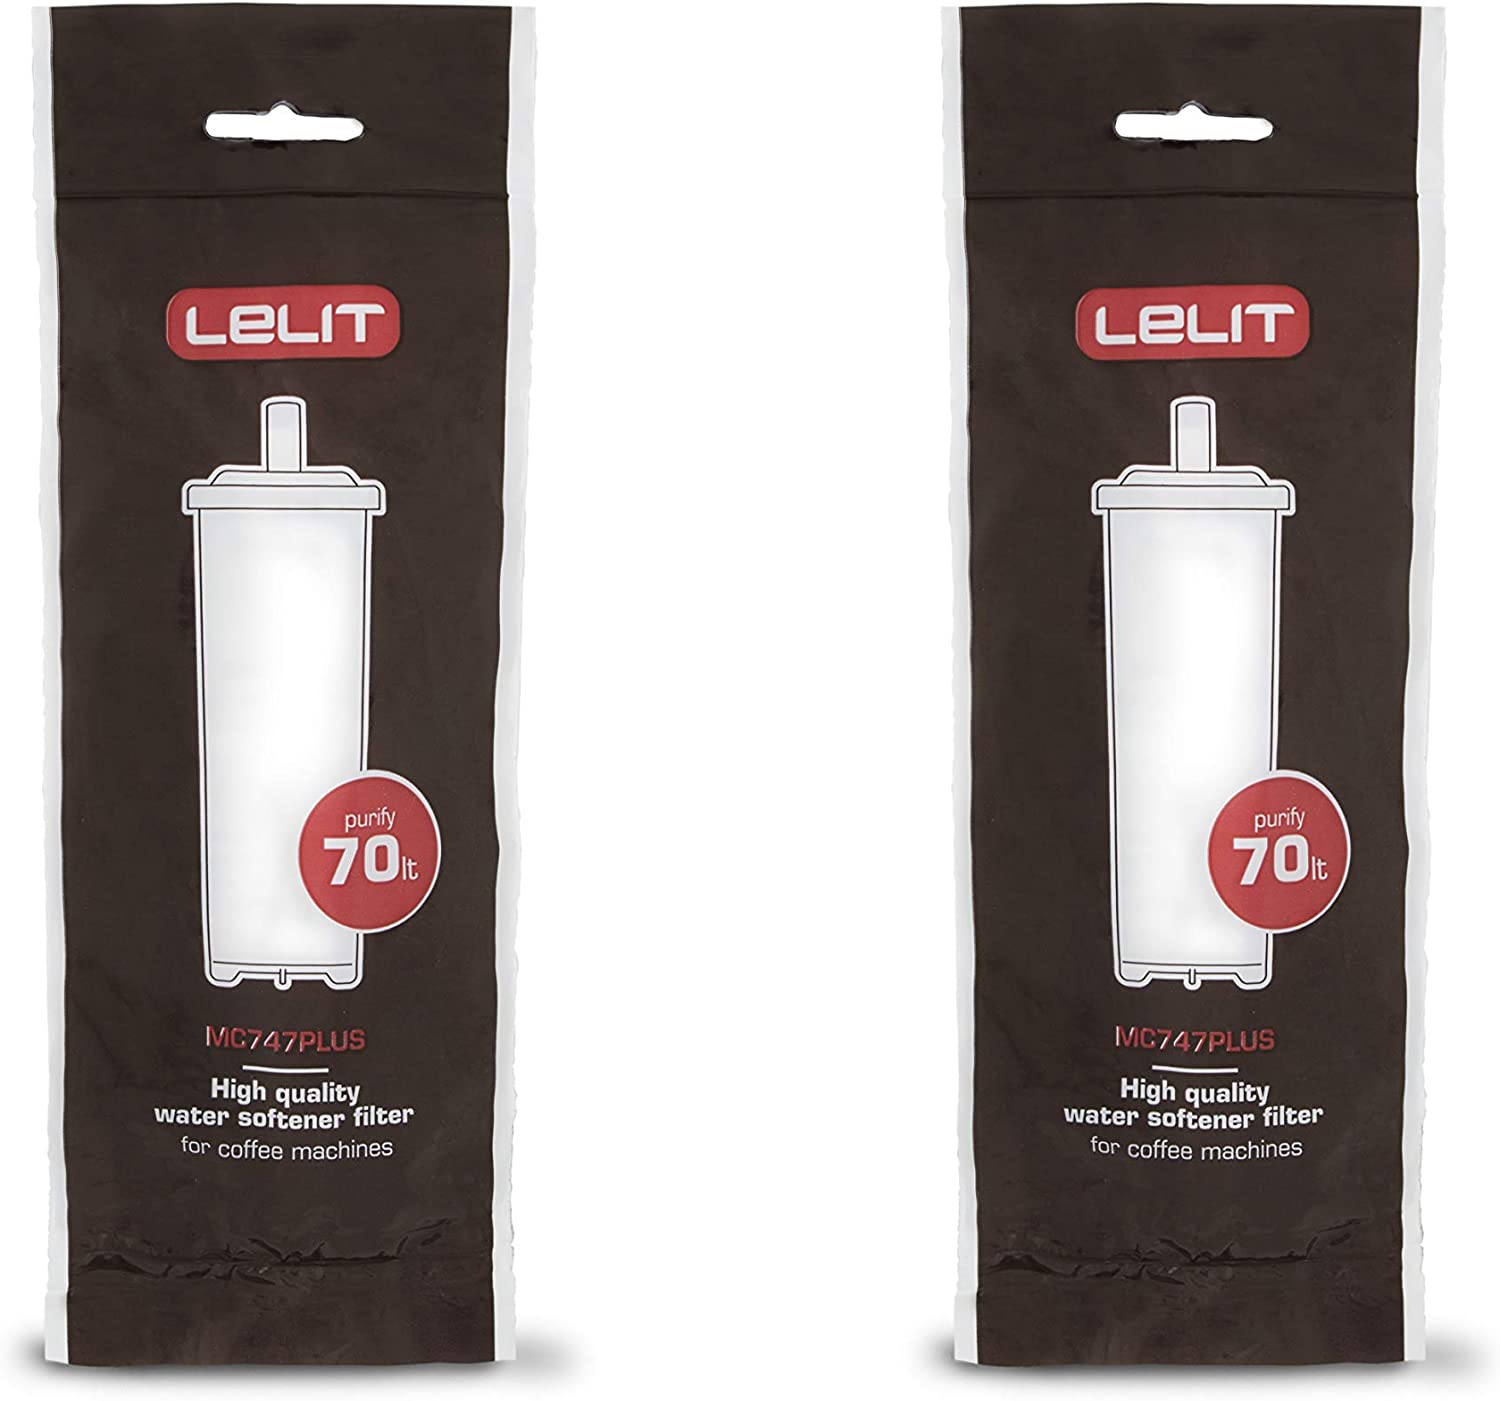 Lelit, pla930m Resin Water Softener Filter for Coffee Machines